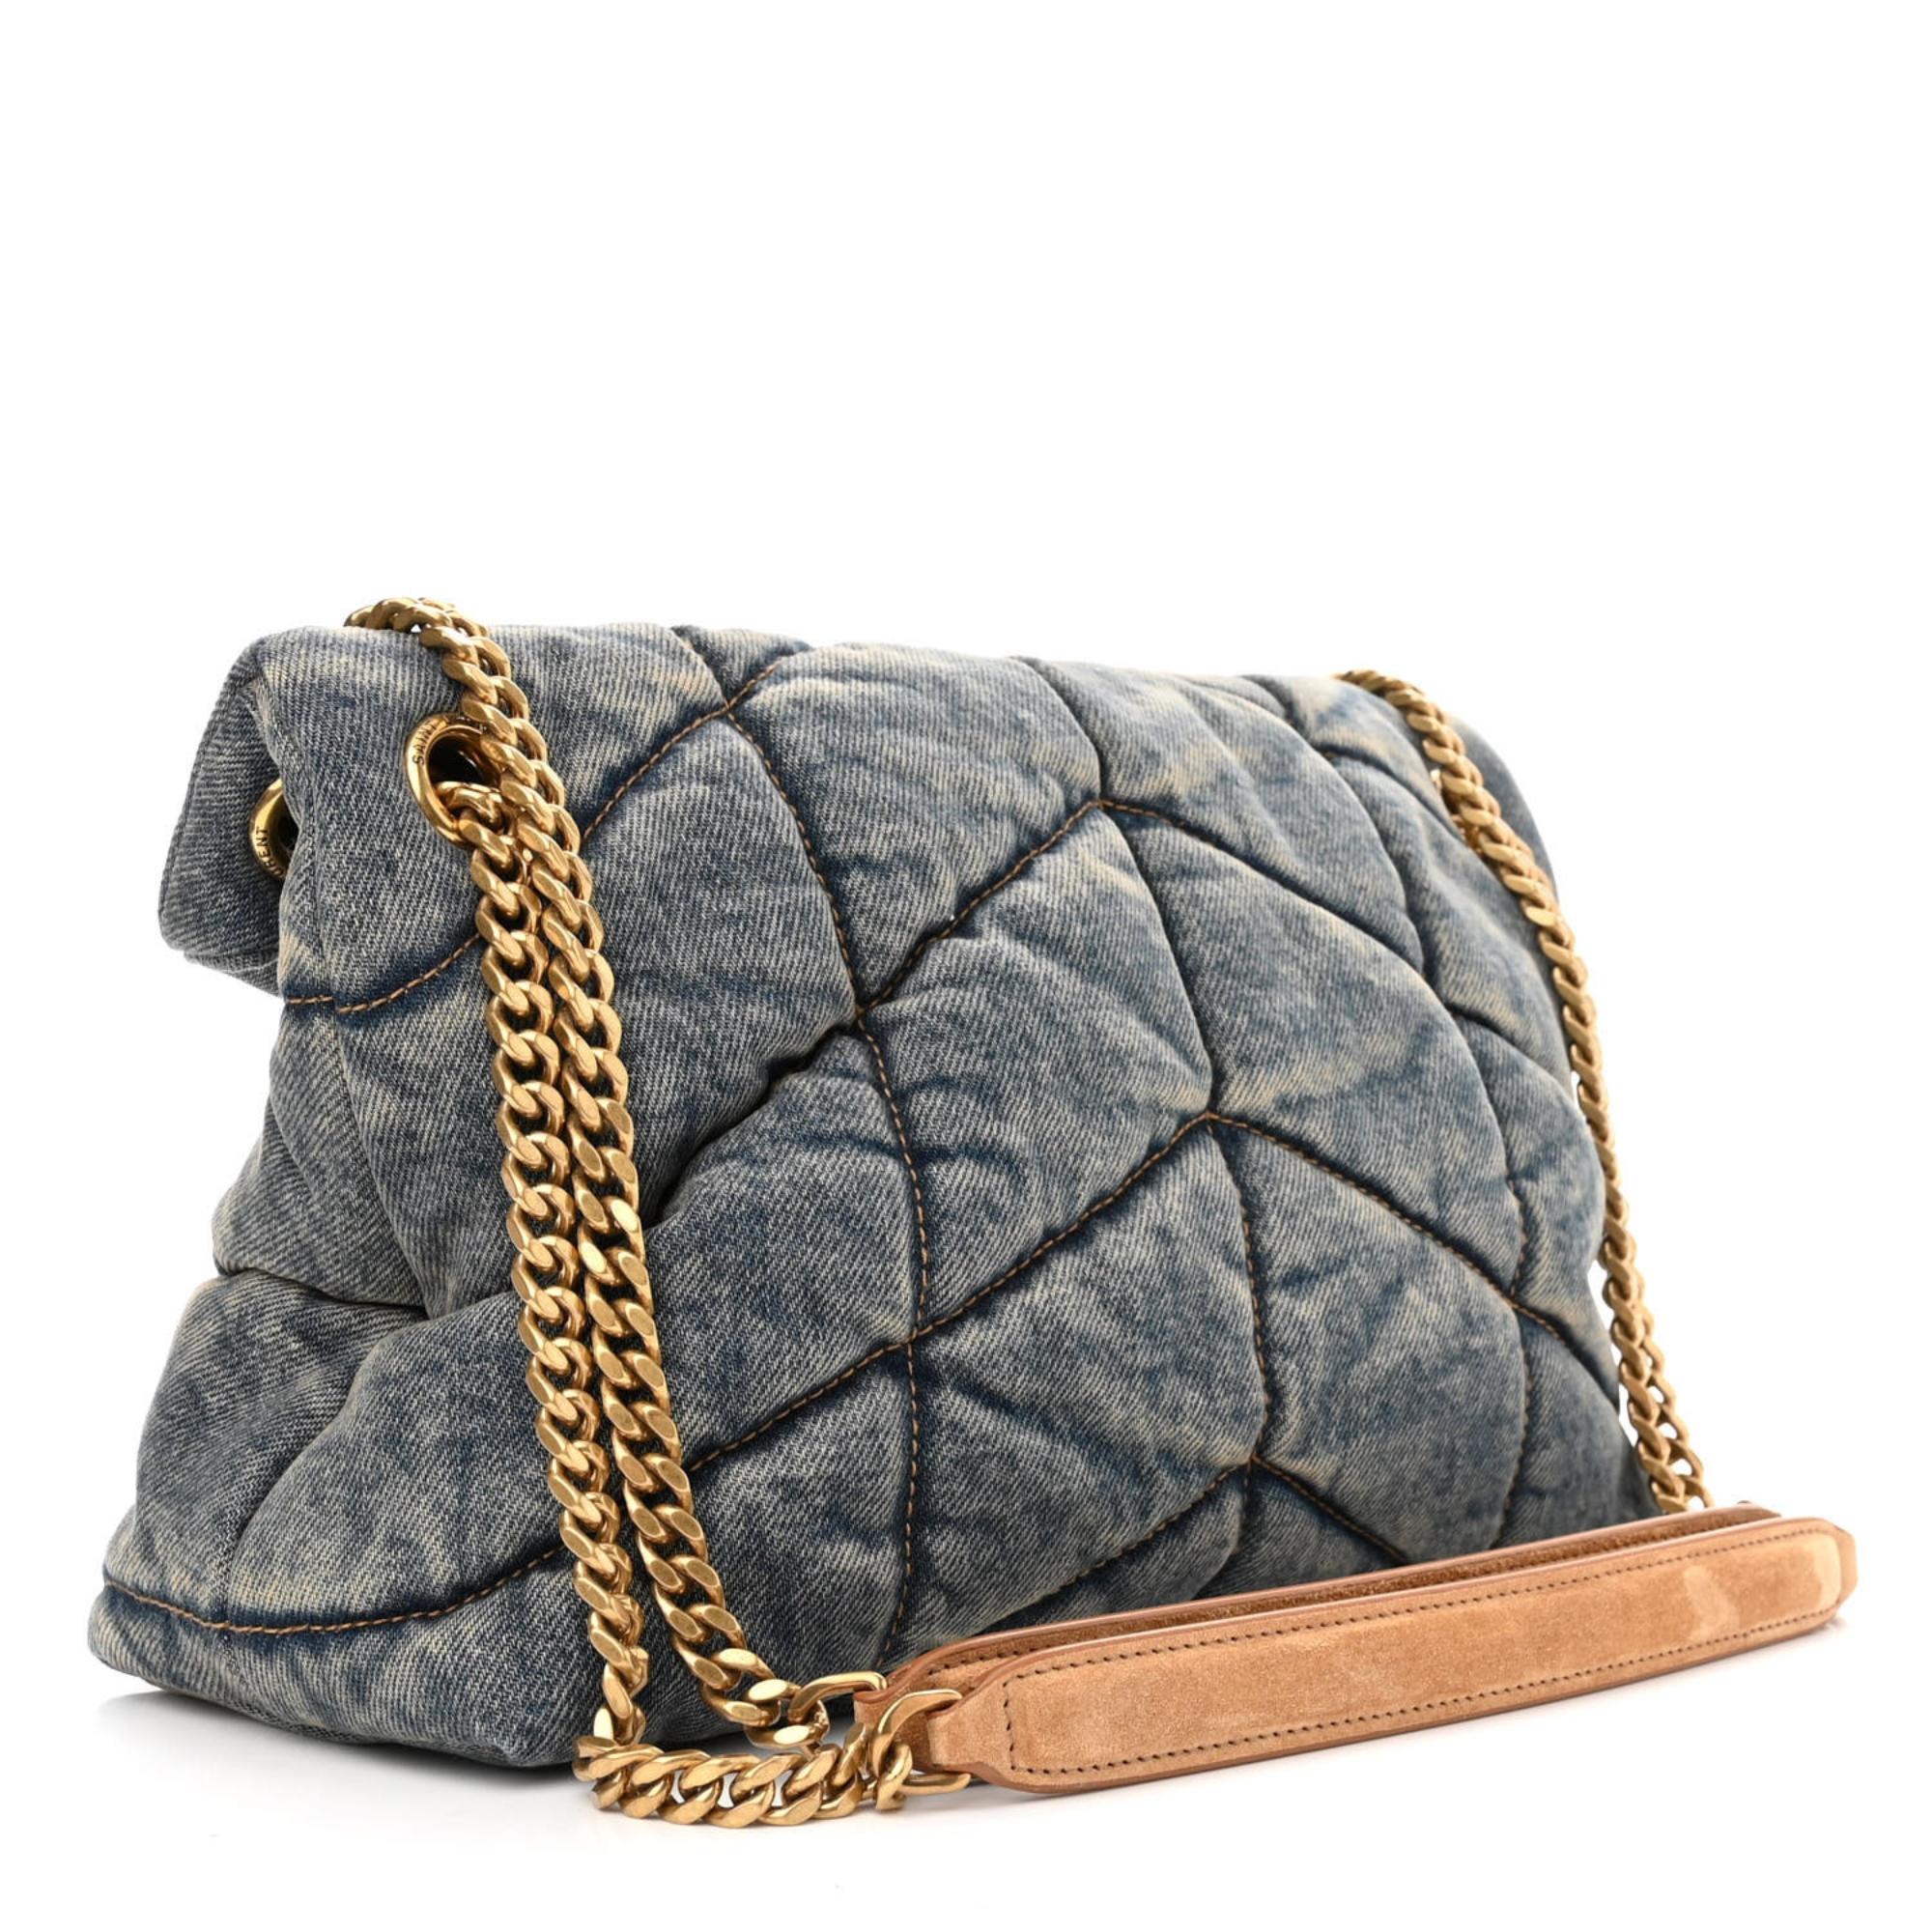 This Saint Laurent shoulder bag is made with signature quilted denim with the iconic ysl logo hardware on the front in gold tone. The bag features an adjustable shoulder strap with a suede pad attached to a chain, top flap with snap closure and two